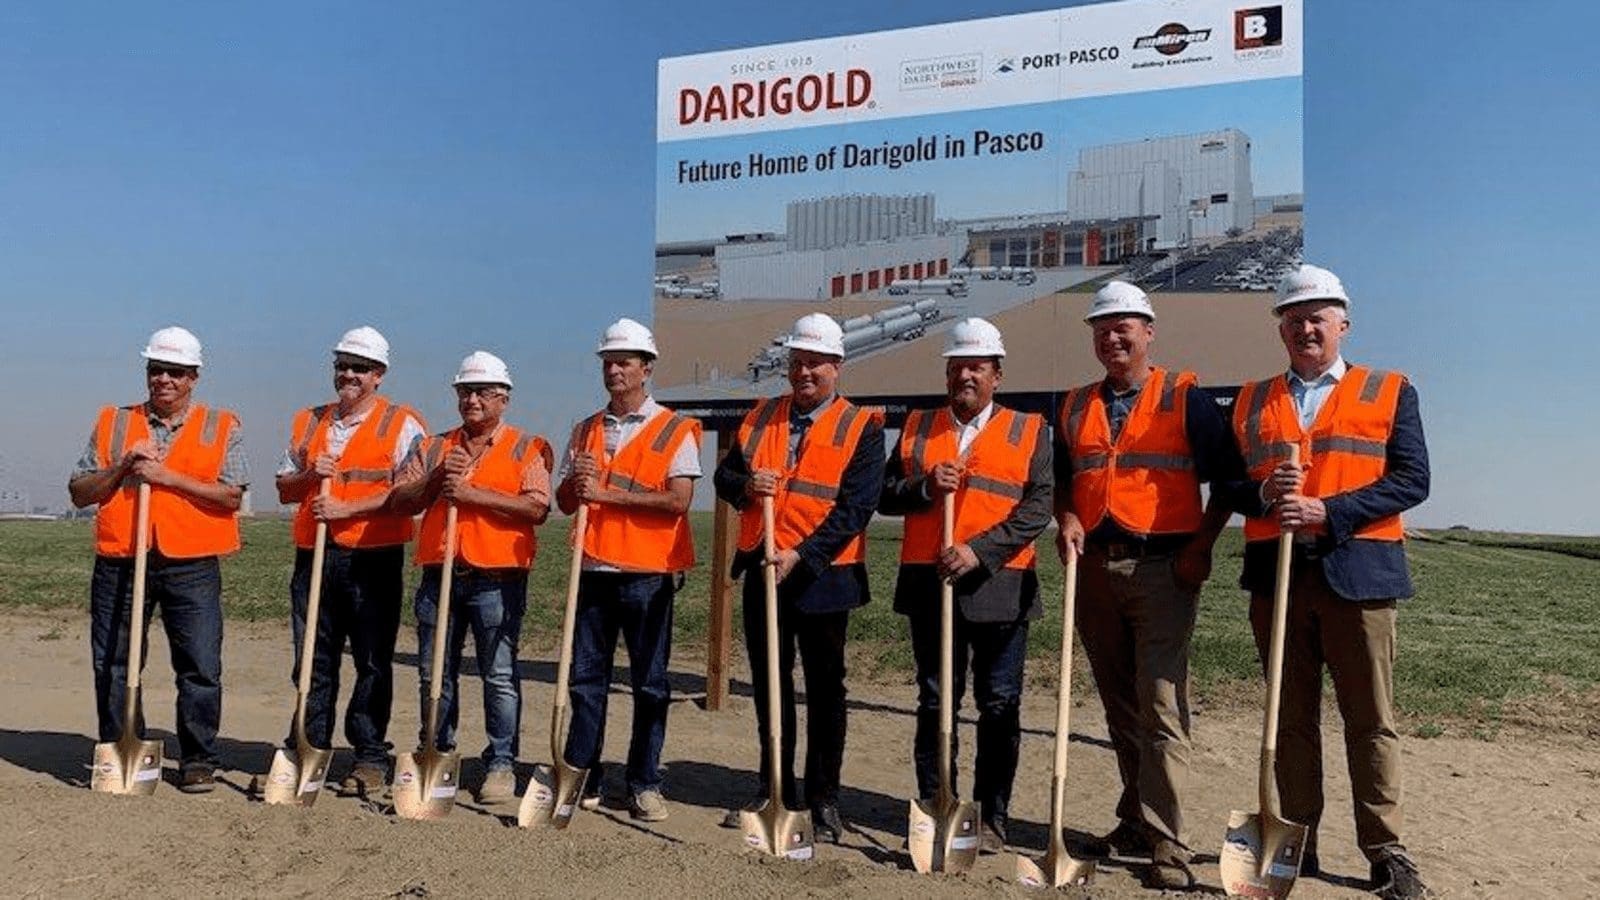 Darigold breaks ground on new US$600m plant in Pasco